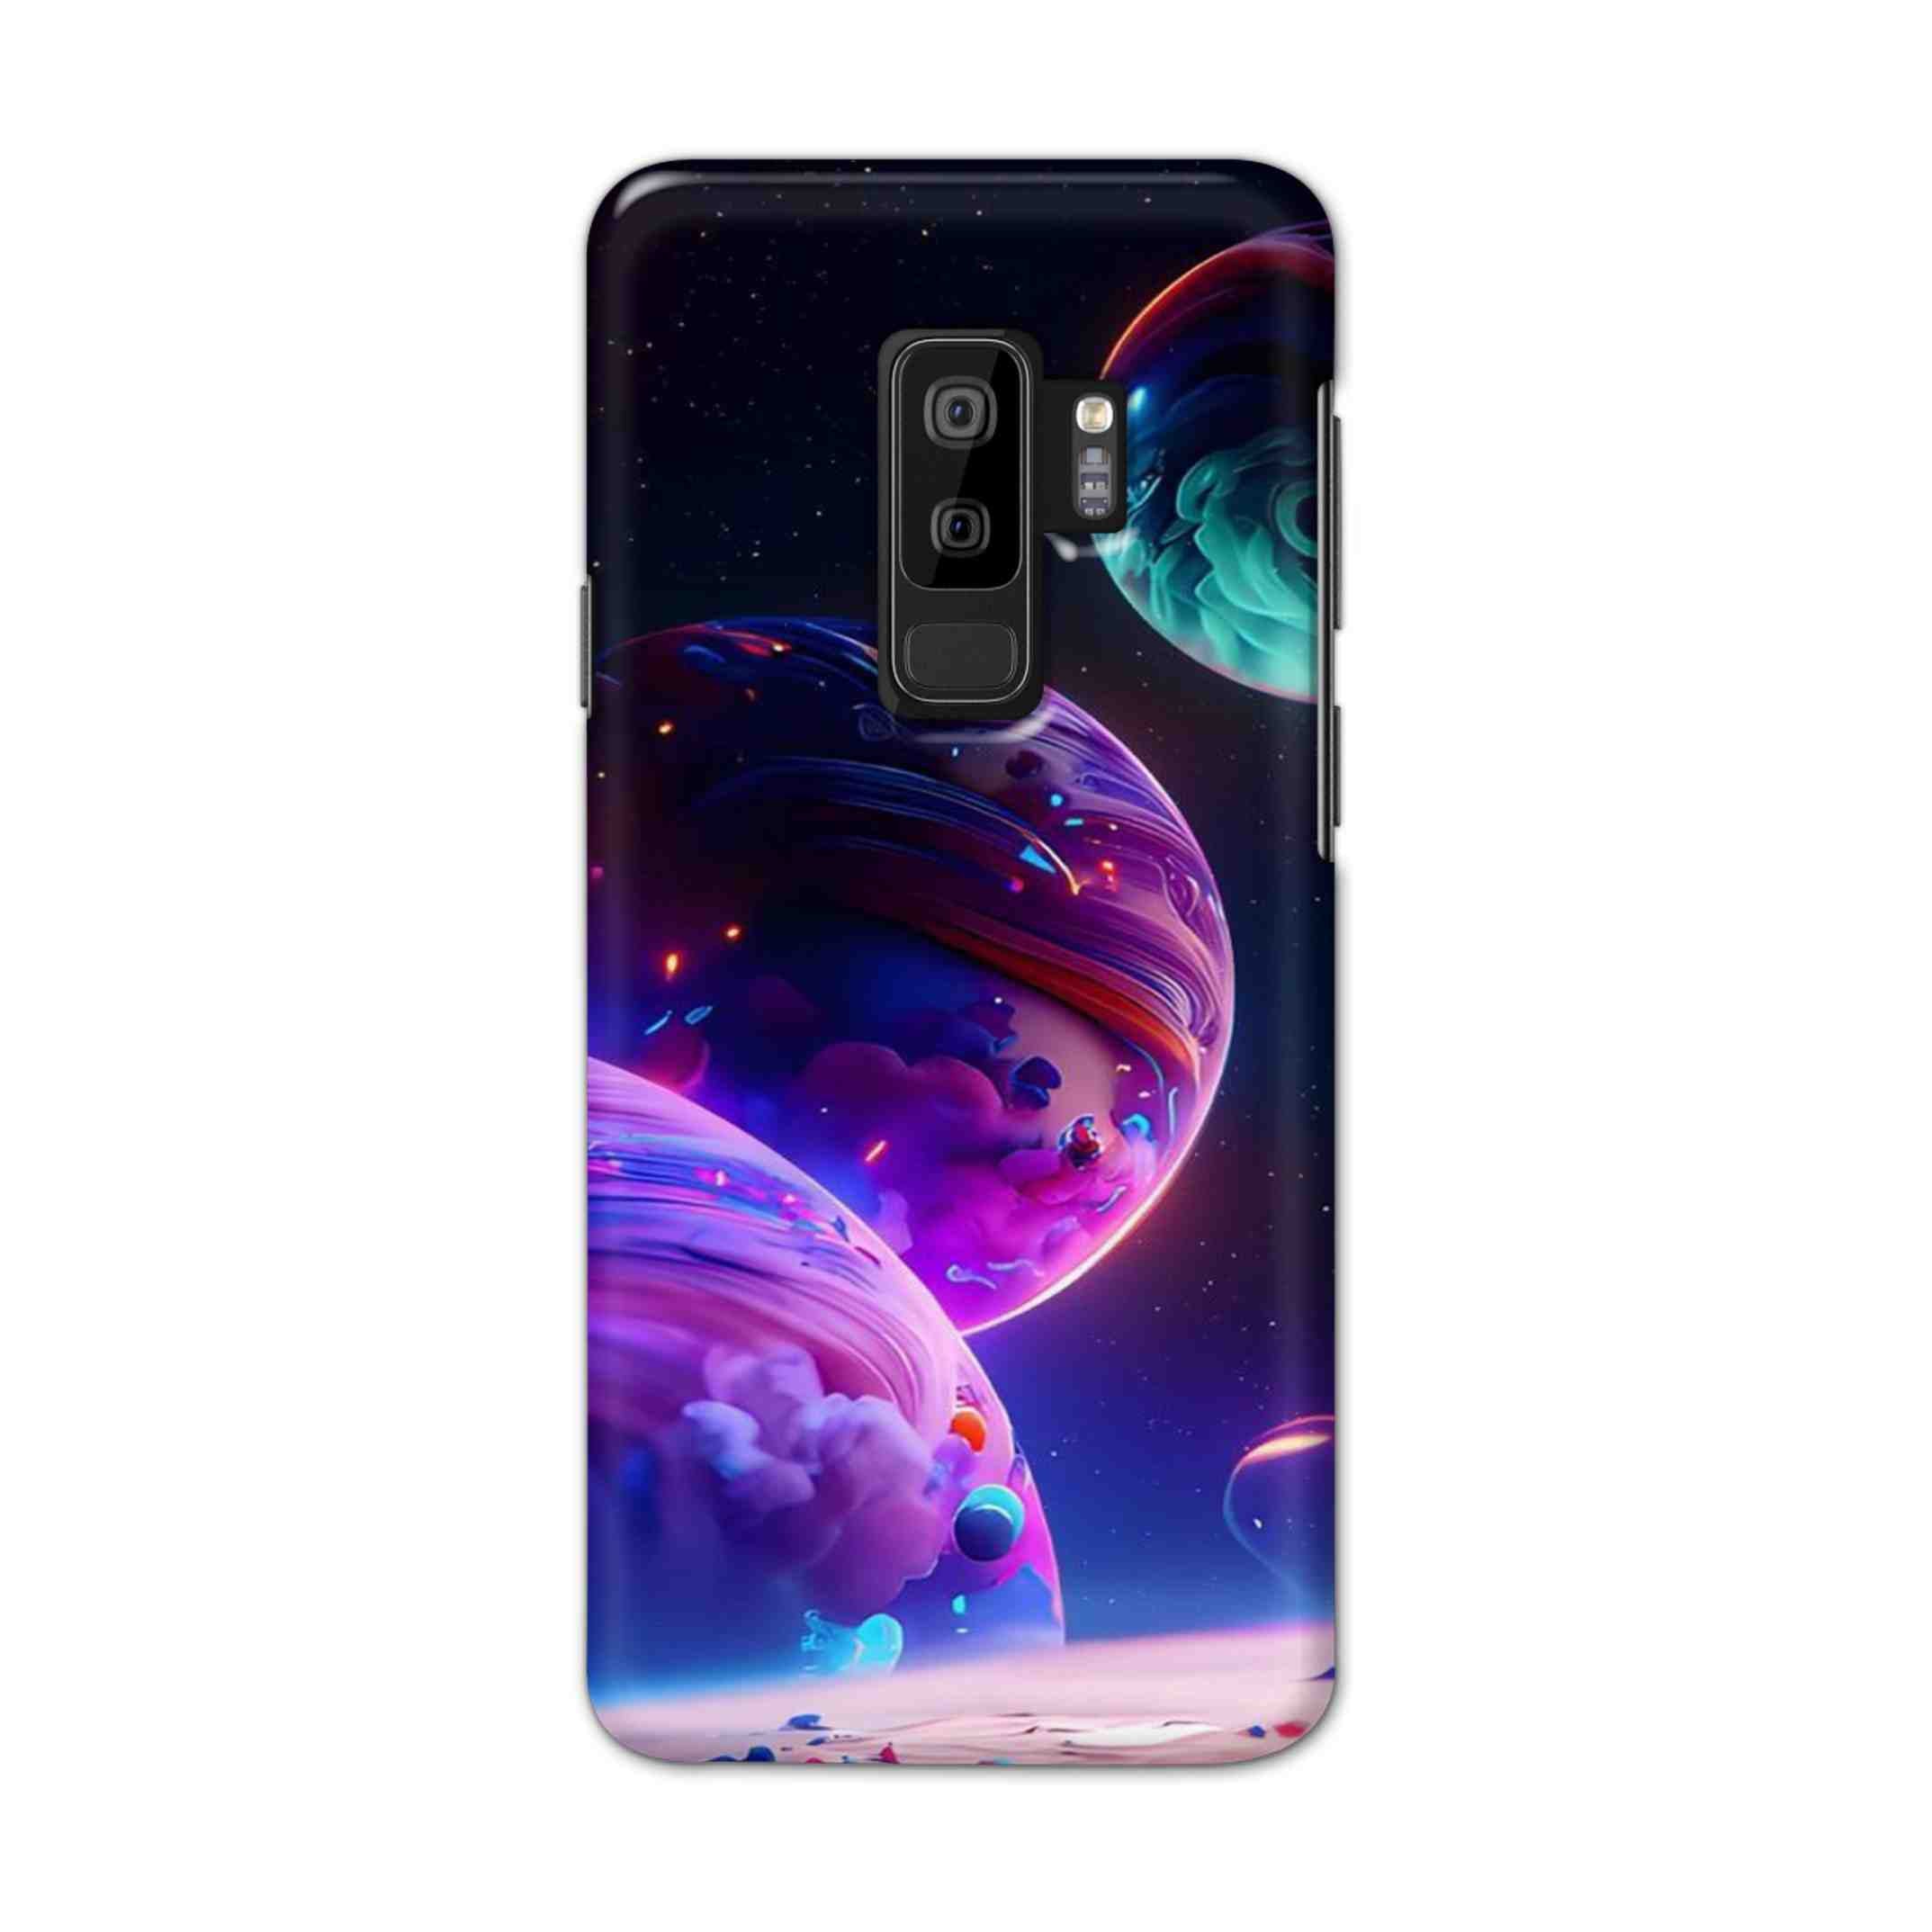 Buy 3 Earth Hard Back Mobile Phone Case Cover For Samsung S9 plus Online